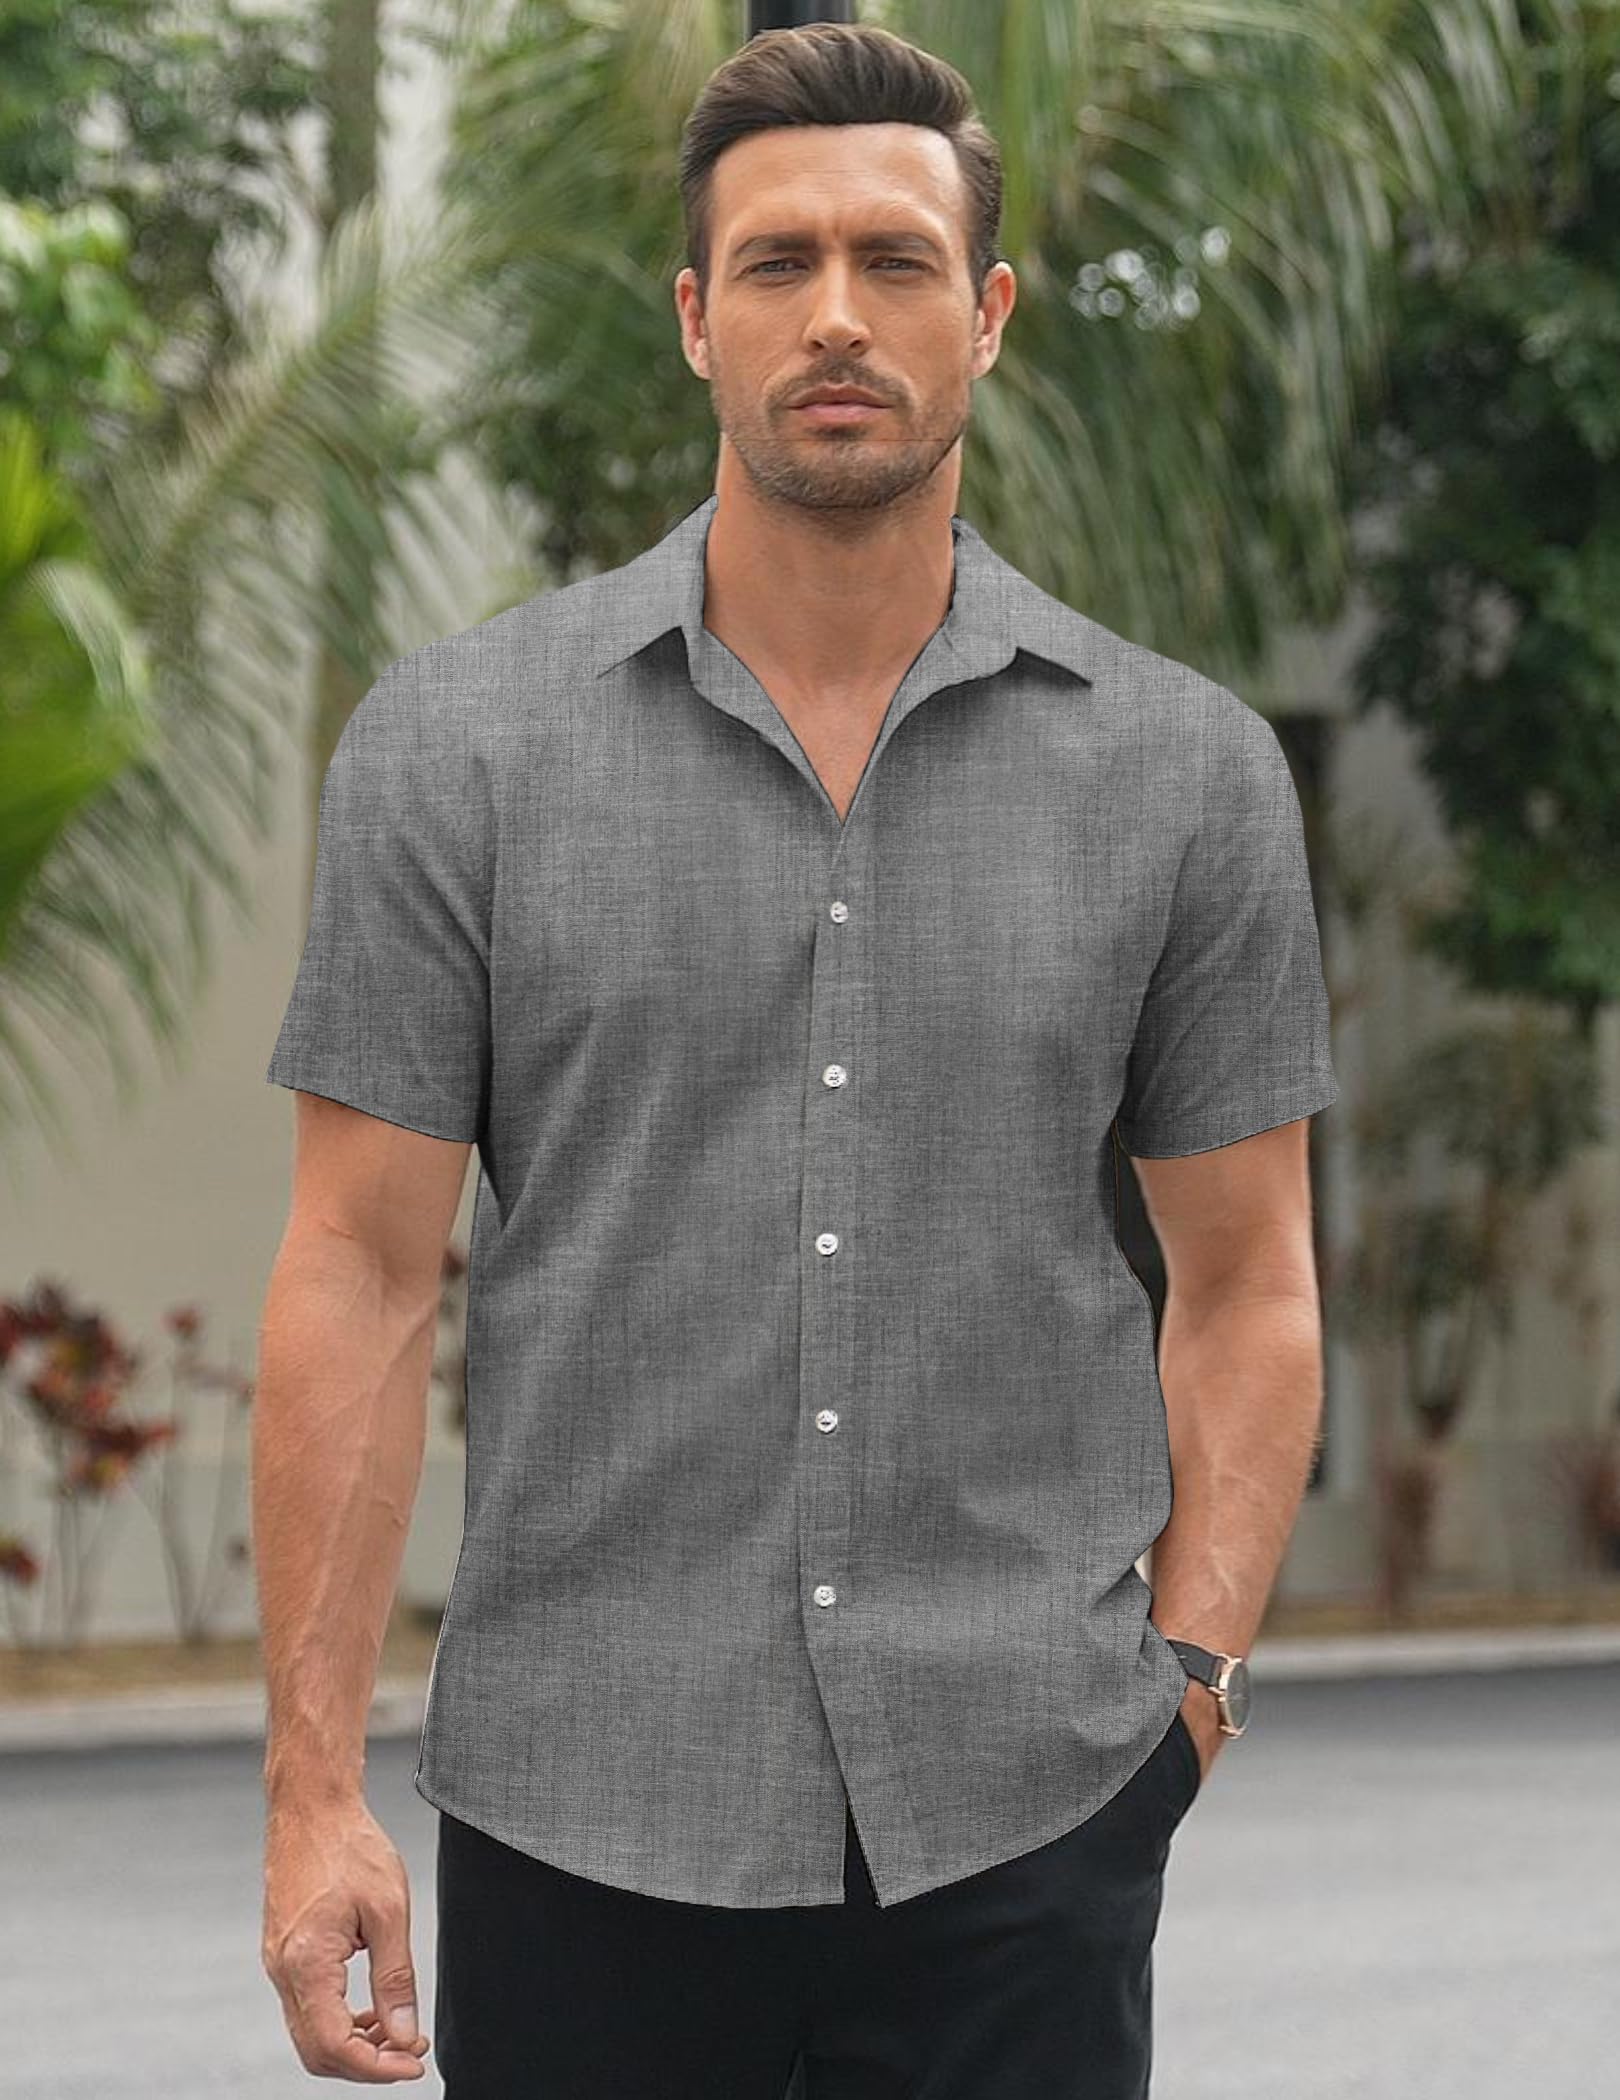 Men's short sleeve button down shirts, men's fashion has evolved over the years, offering a wide range of options to suit every style and occasion.